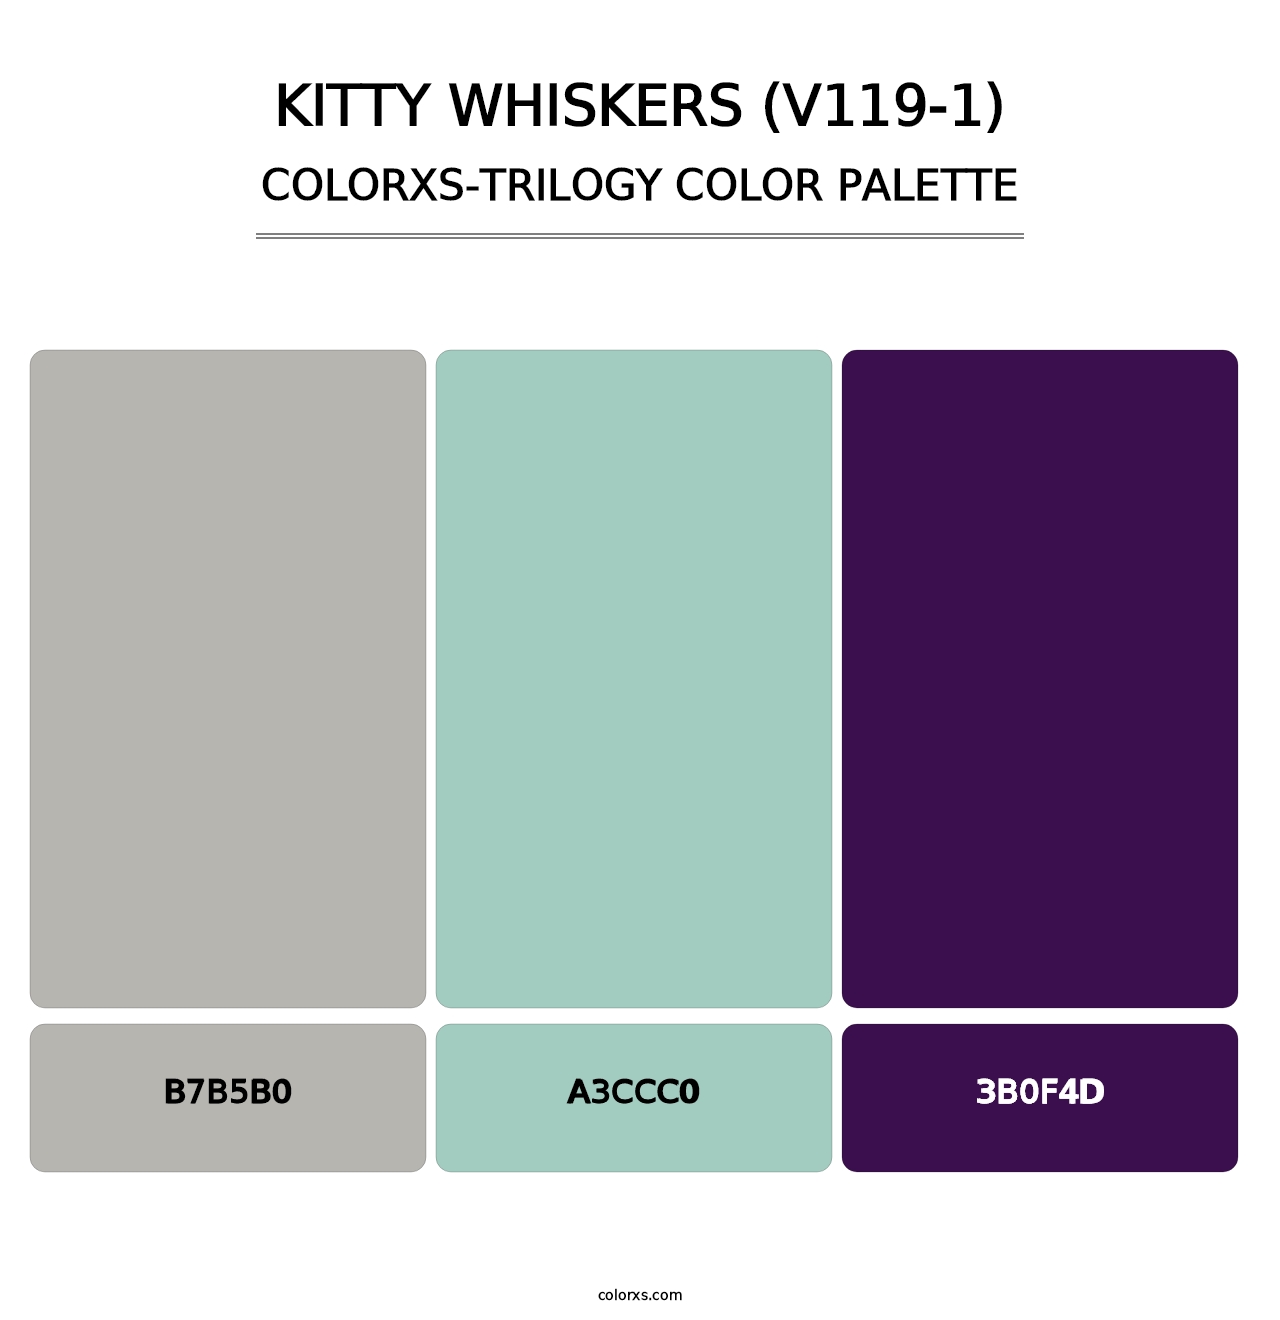 Kitty Whiskers (V119-1) - Colorxs Trilogy Palette